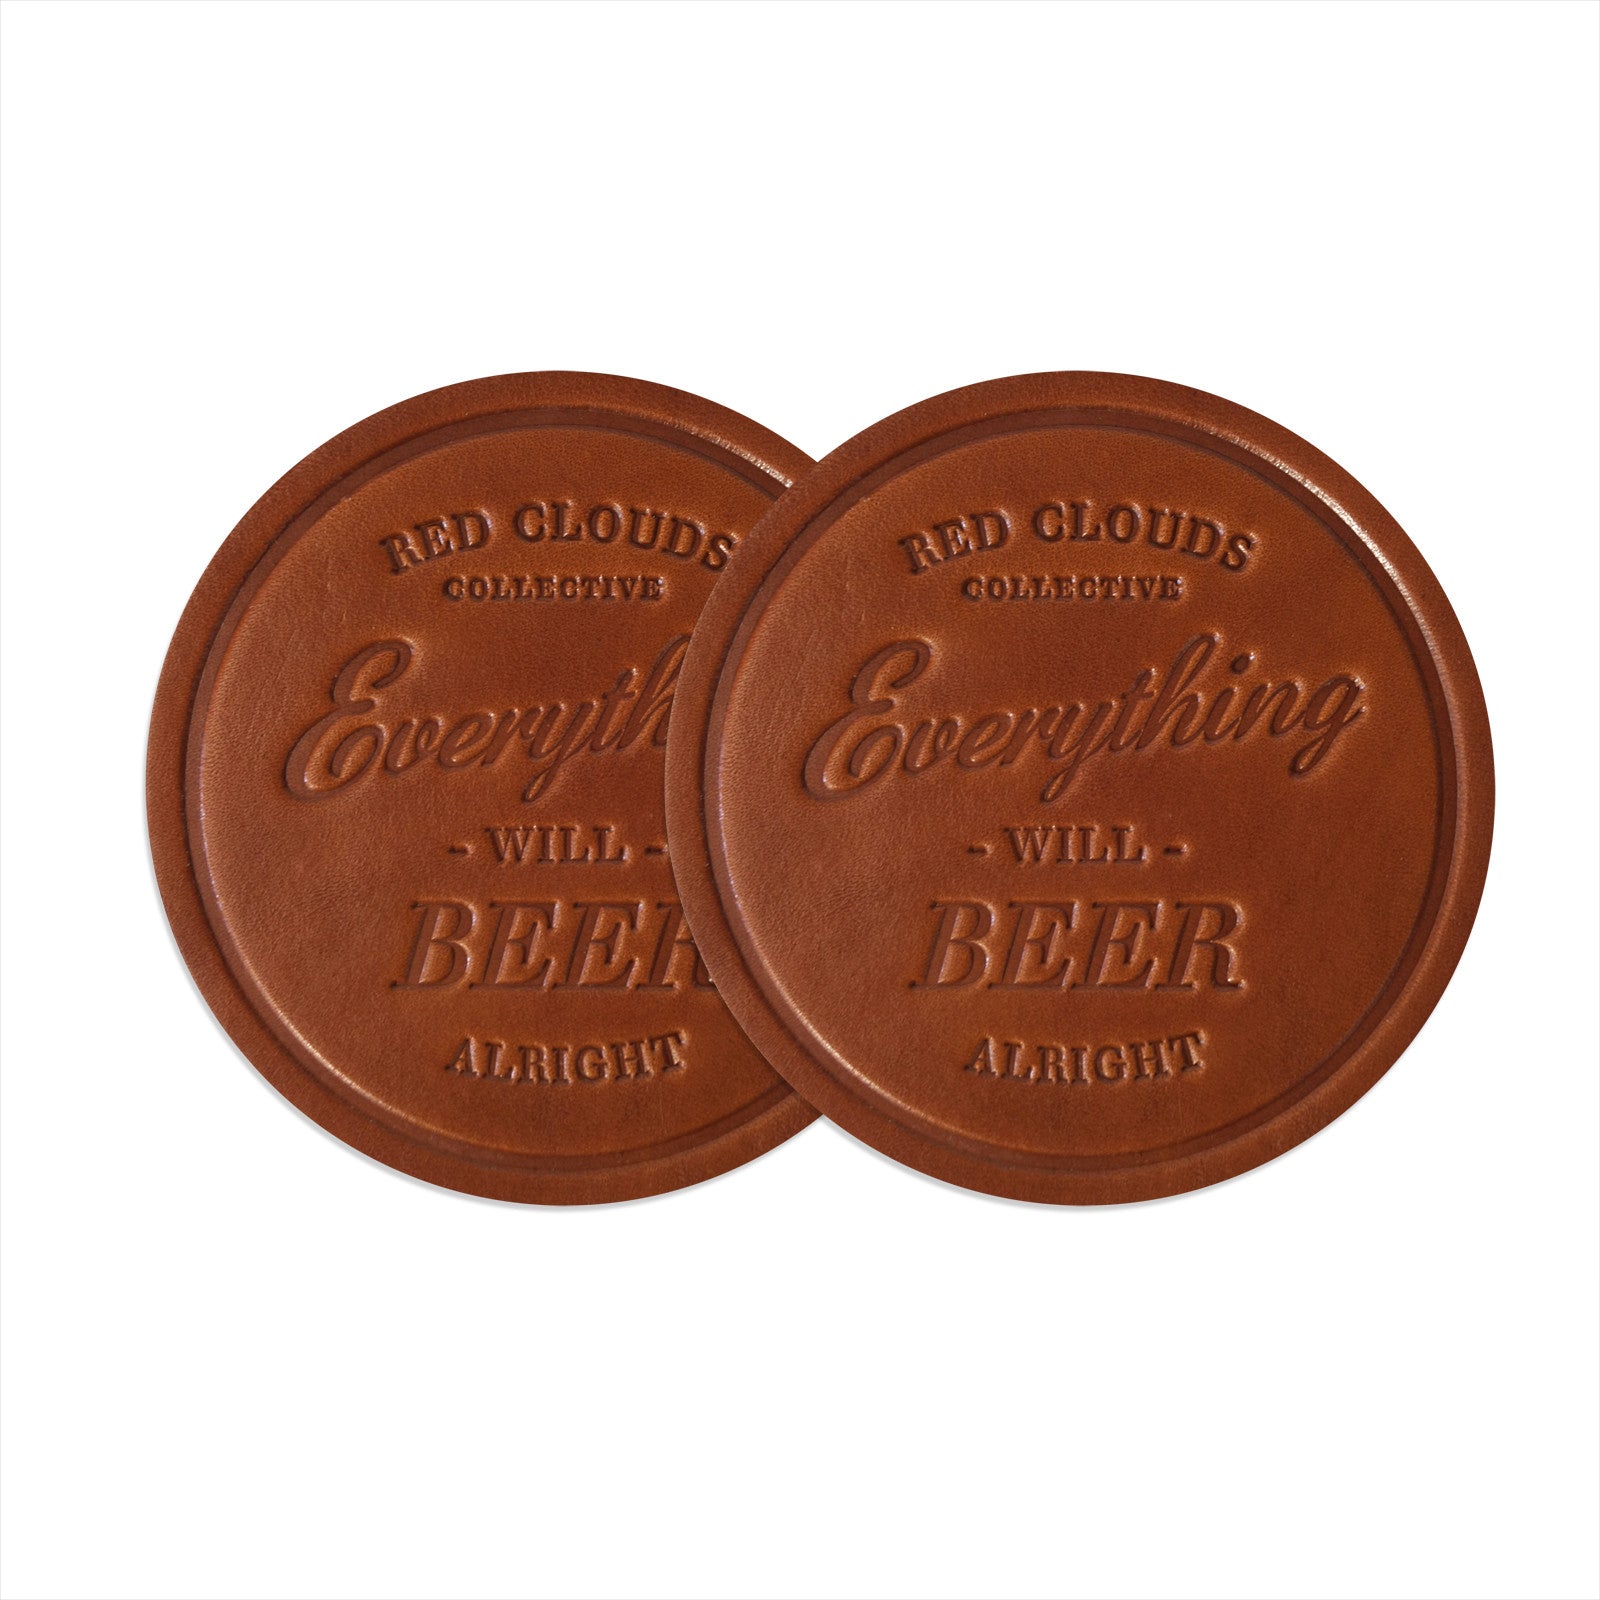 leather, leather beer coaster, leather drink coaster, handmade, handcrafted in the usa, american made, set of leather coasters